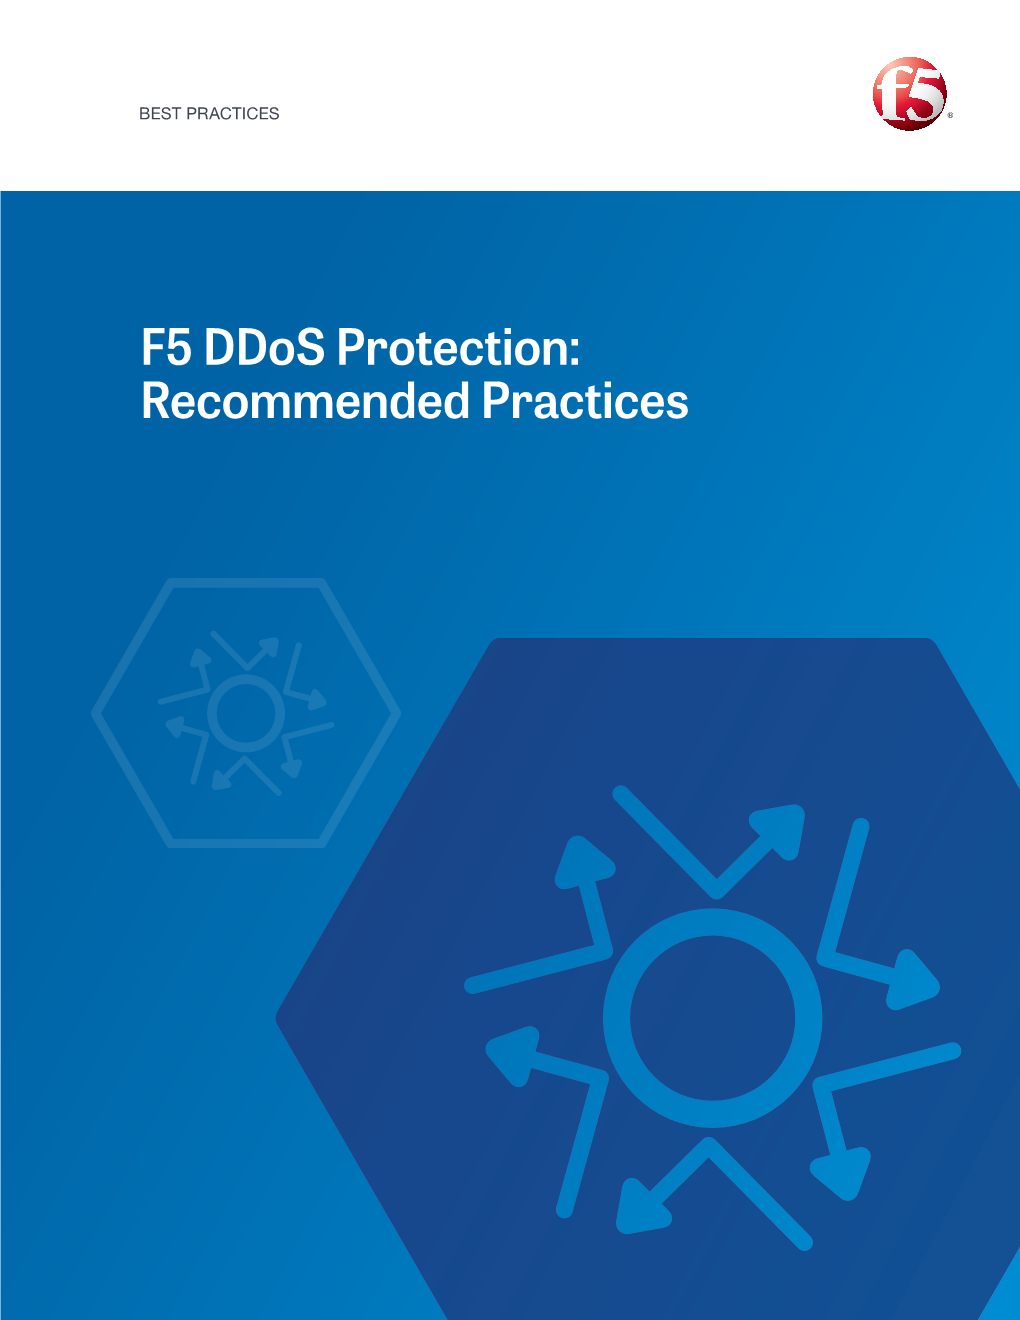 F5 Ddos Protection: Recommended Practices F5 Ddos Recommended Practices